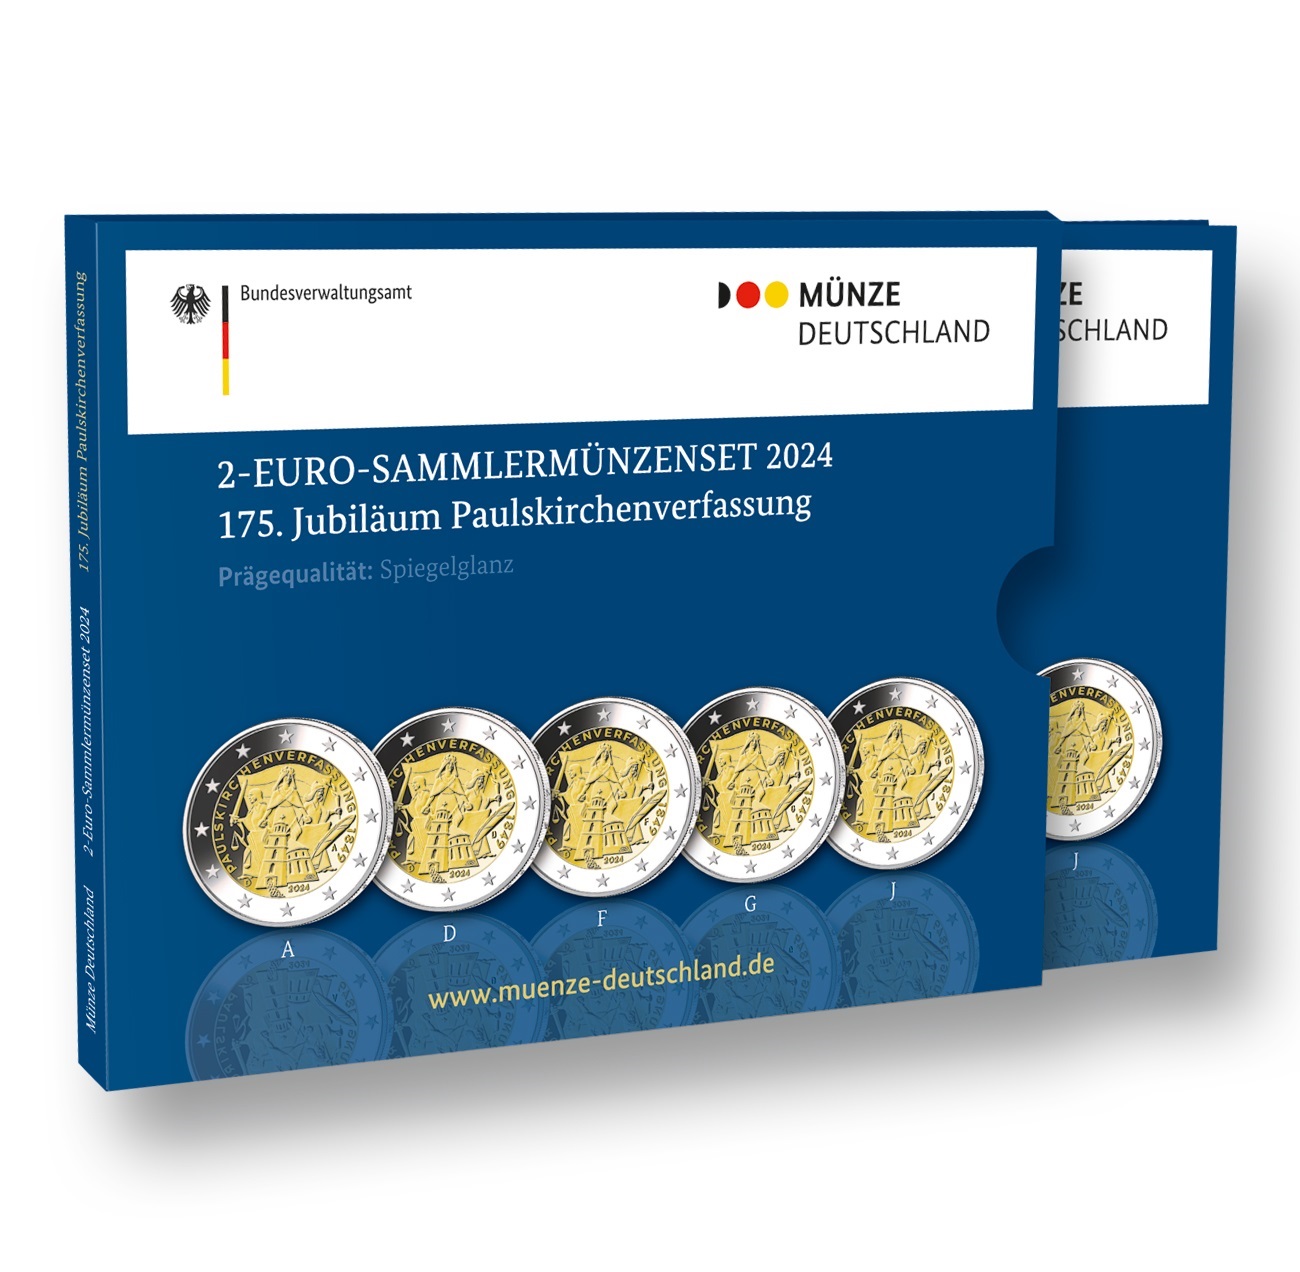 (EUR03.Proof.set.2024.1.s) Coin set 2 € Germany 2024 Proof - Frankfurt Constitution (Constitution of St. Paul s Church) (zoom)